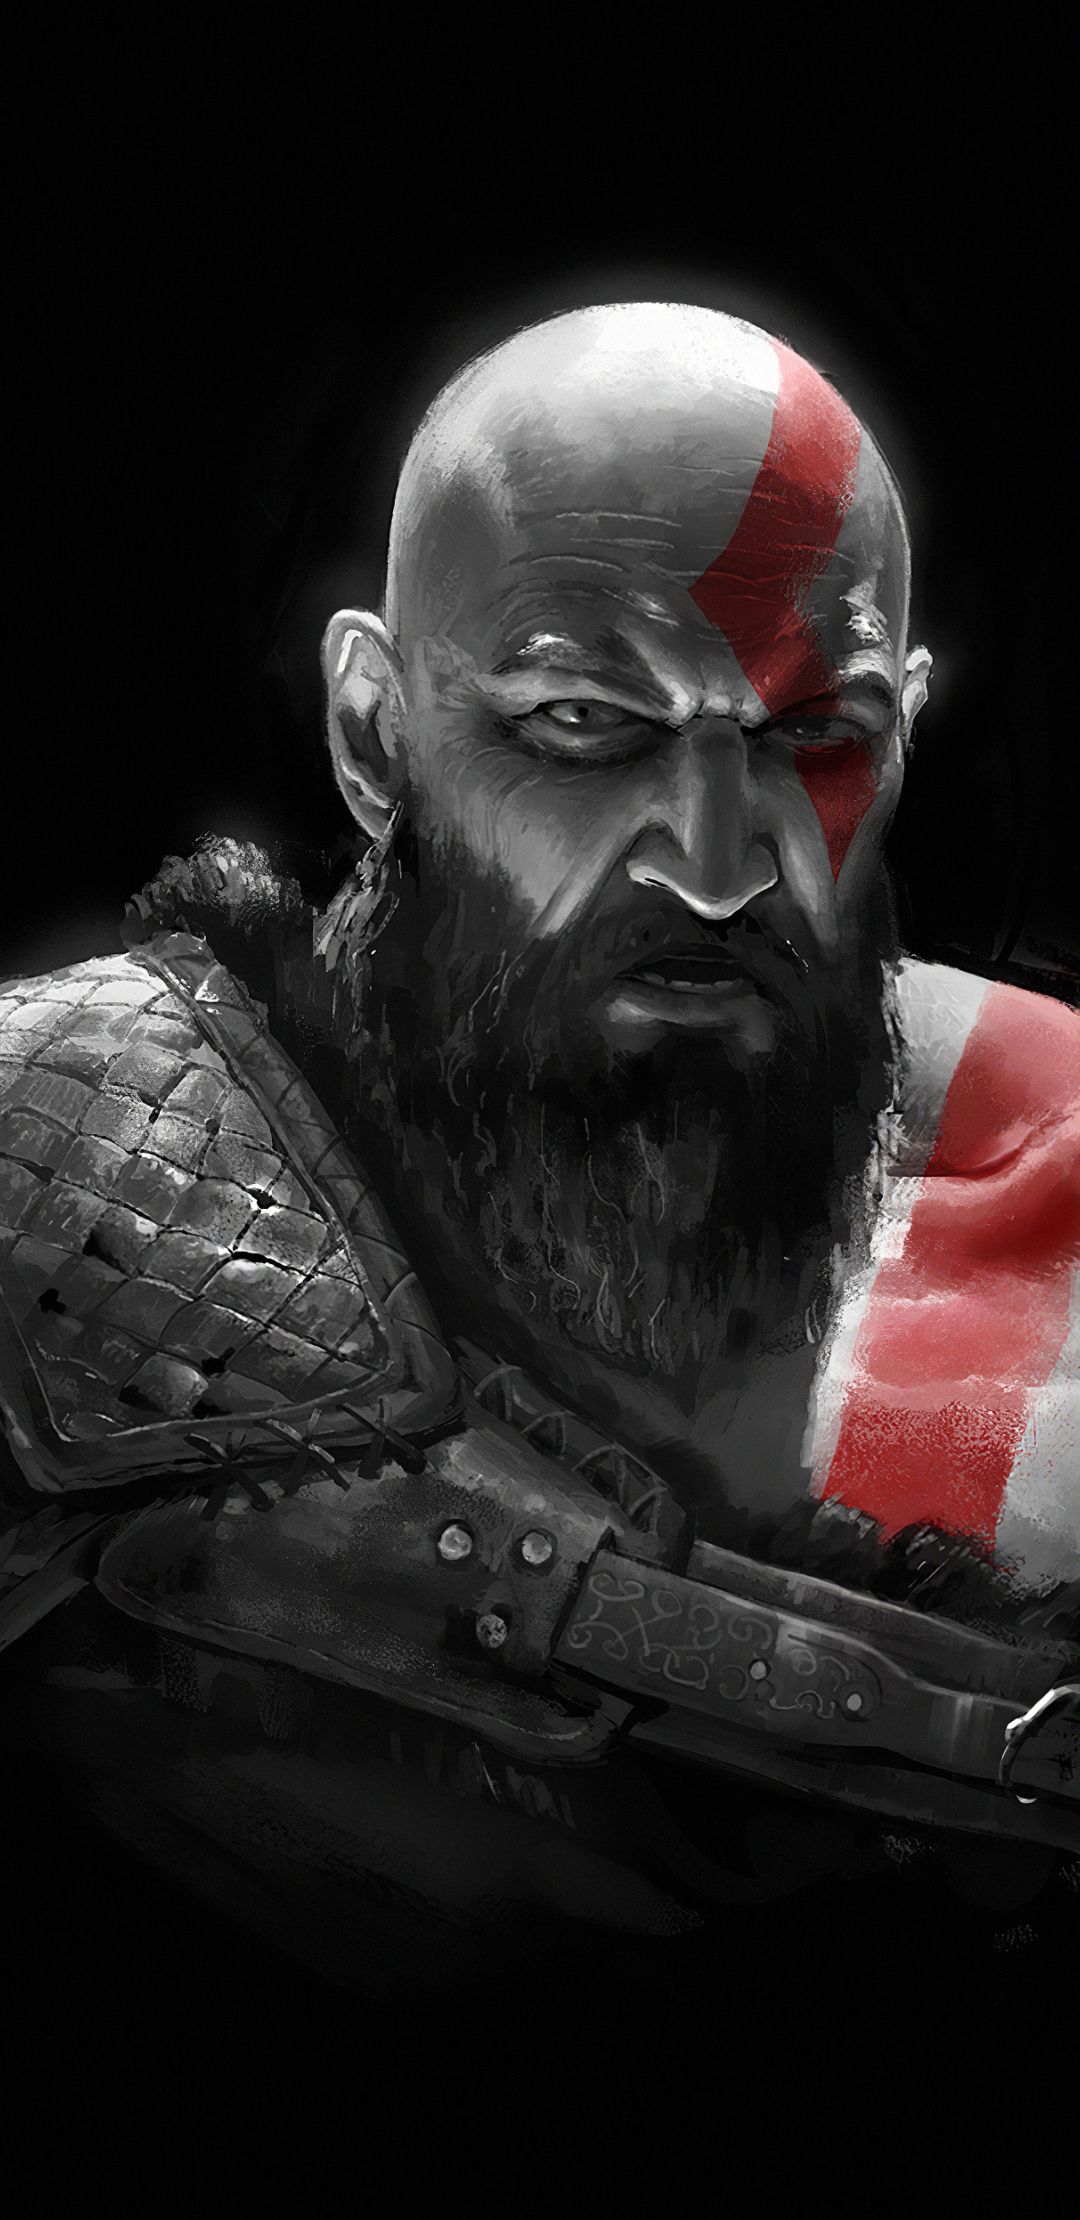 Kratos GoW Amoled 1080x2220 Resolution Wallpaper, HD Games 4K Wallpaper, Image, Photo and Background